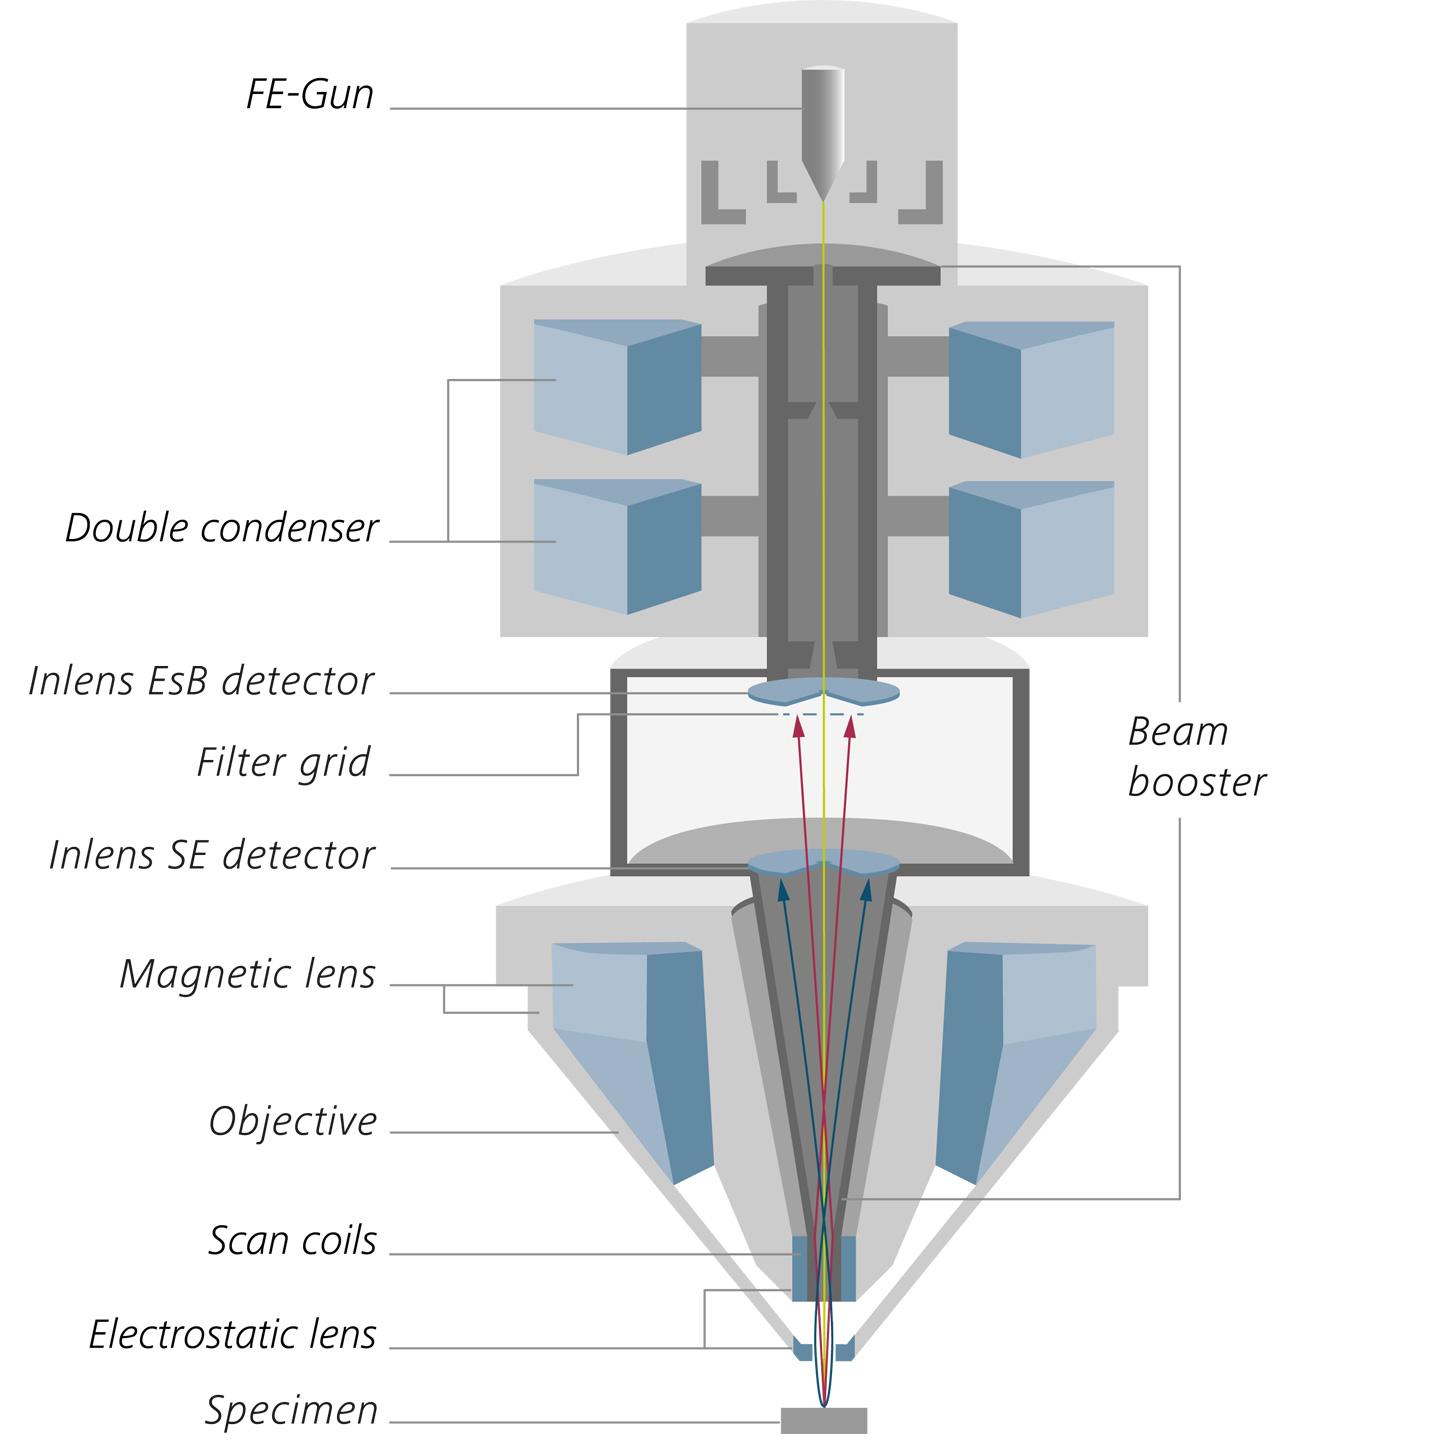 Gemini technology. Schematic cross-section of Gemini 2 optical column with a double condenser, beam booster, Inlens detectors and Gemini objective.